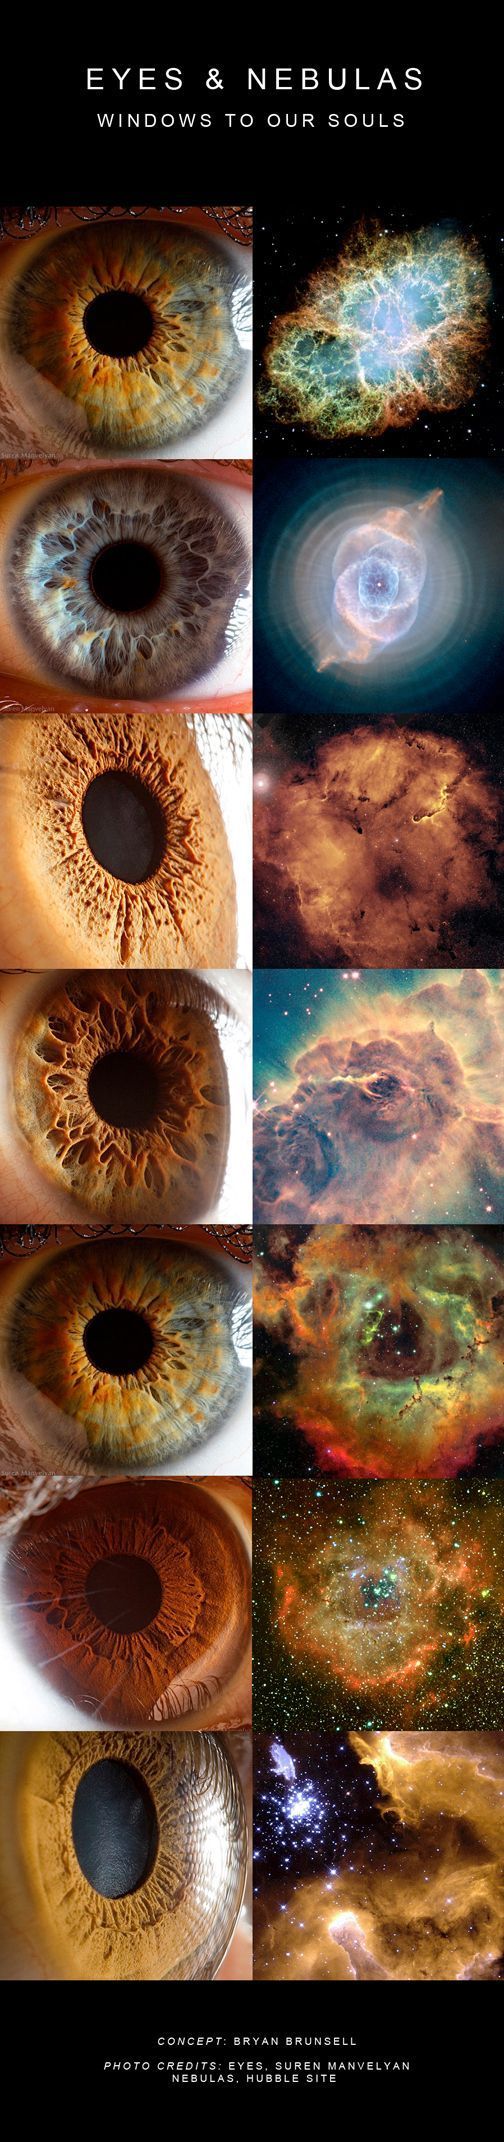 14 Beautiful Eyes Pictures Eyes and Nebulas::cM We are all made of stars…. via